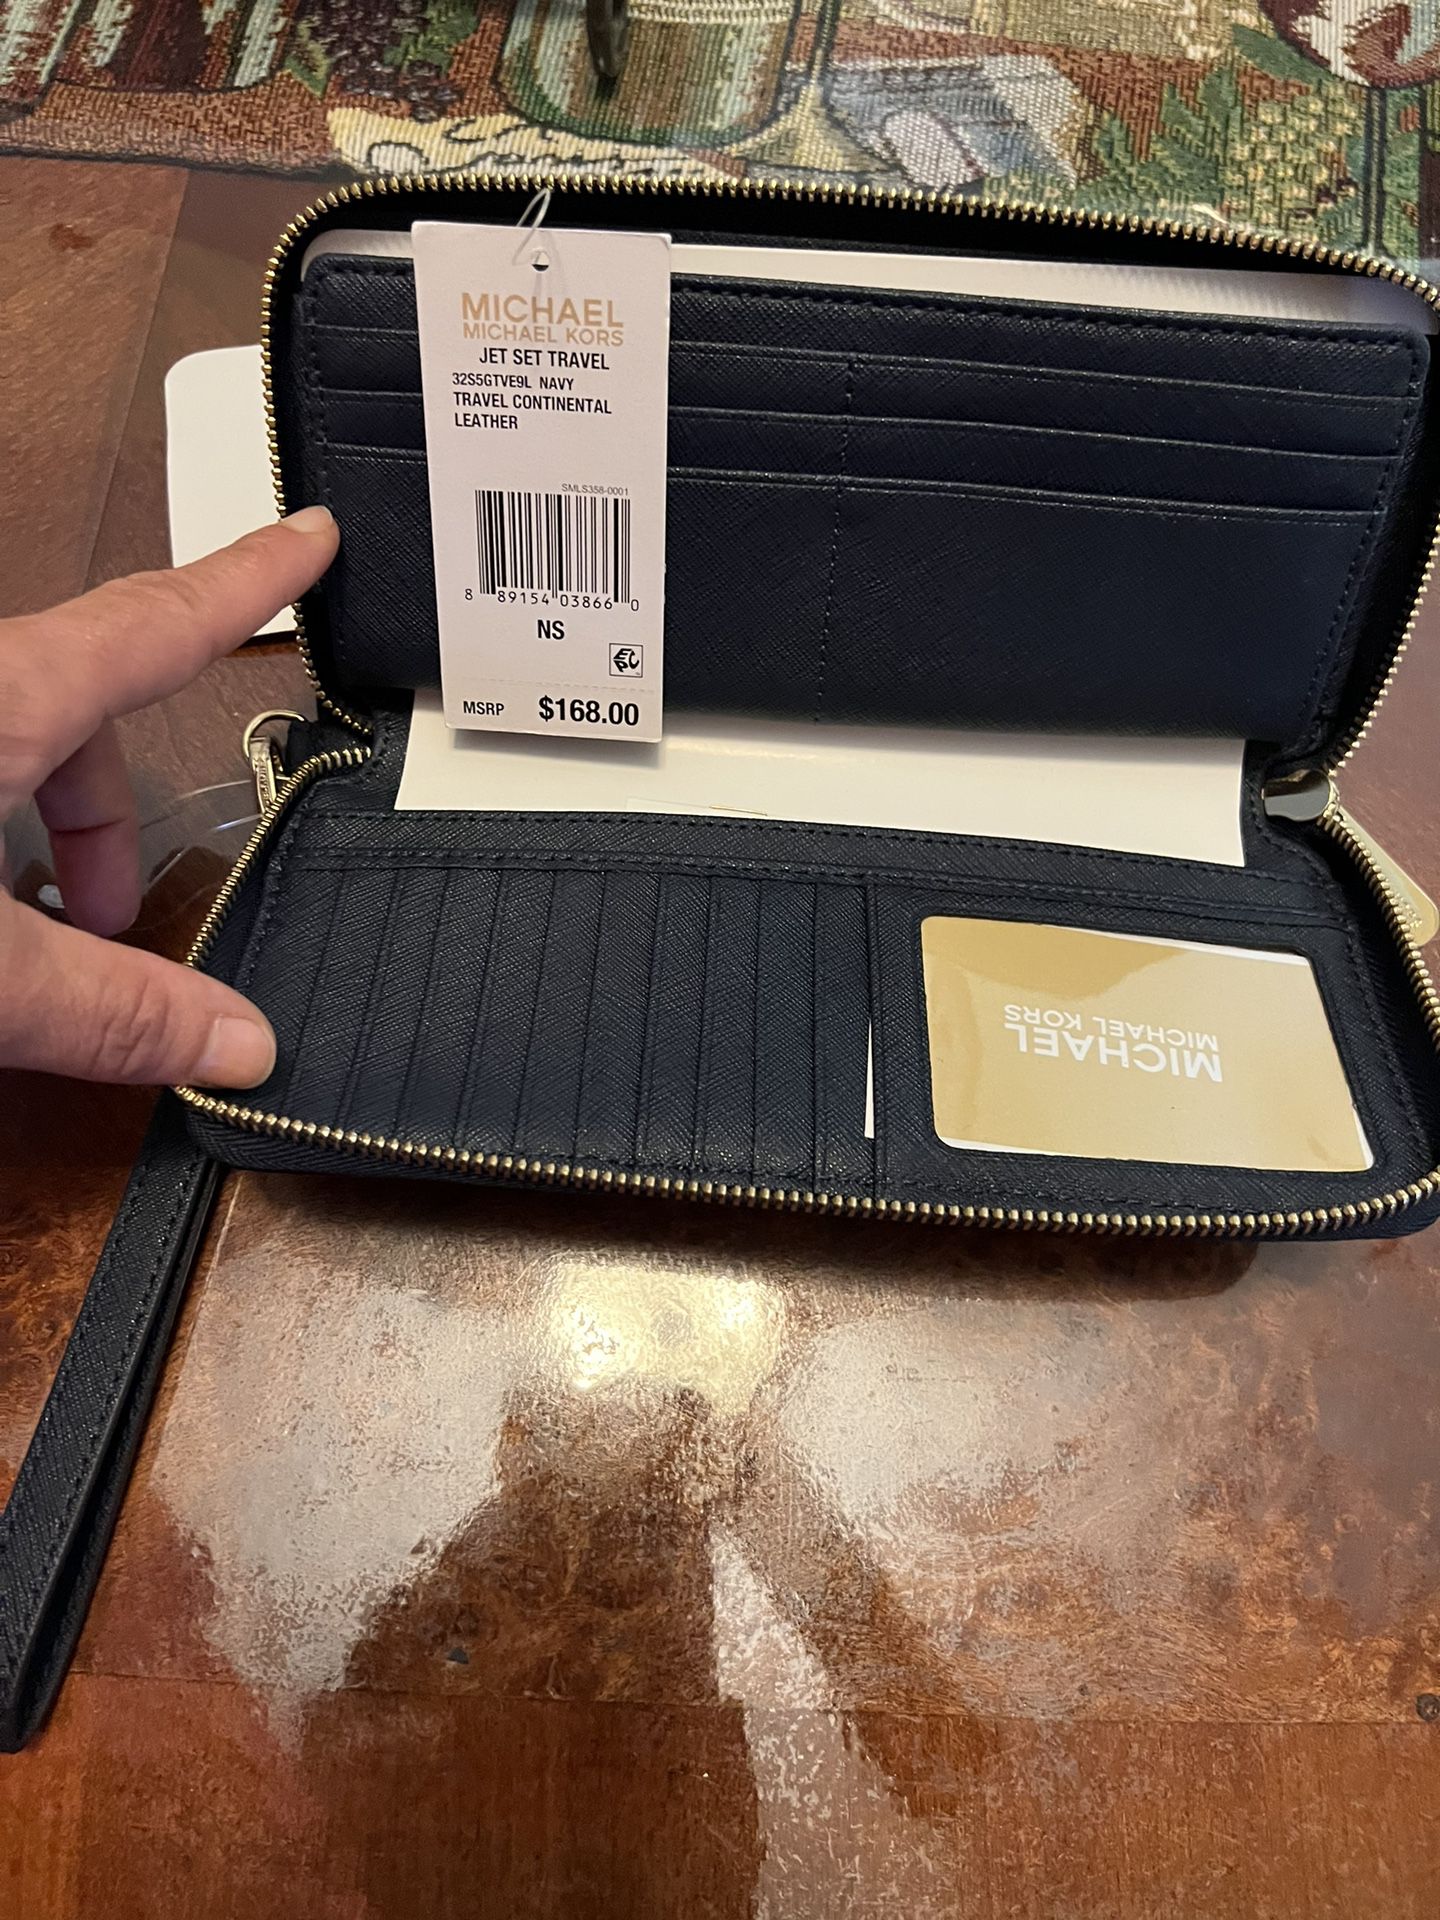 Used Michael Kors Black Wallet for Sale in Grand Terrace, CA - OfferUp